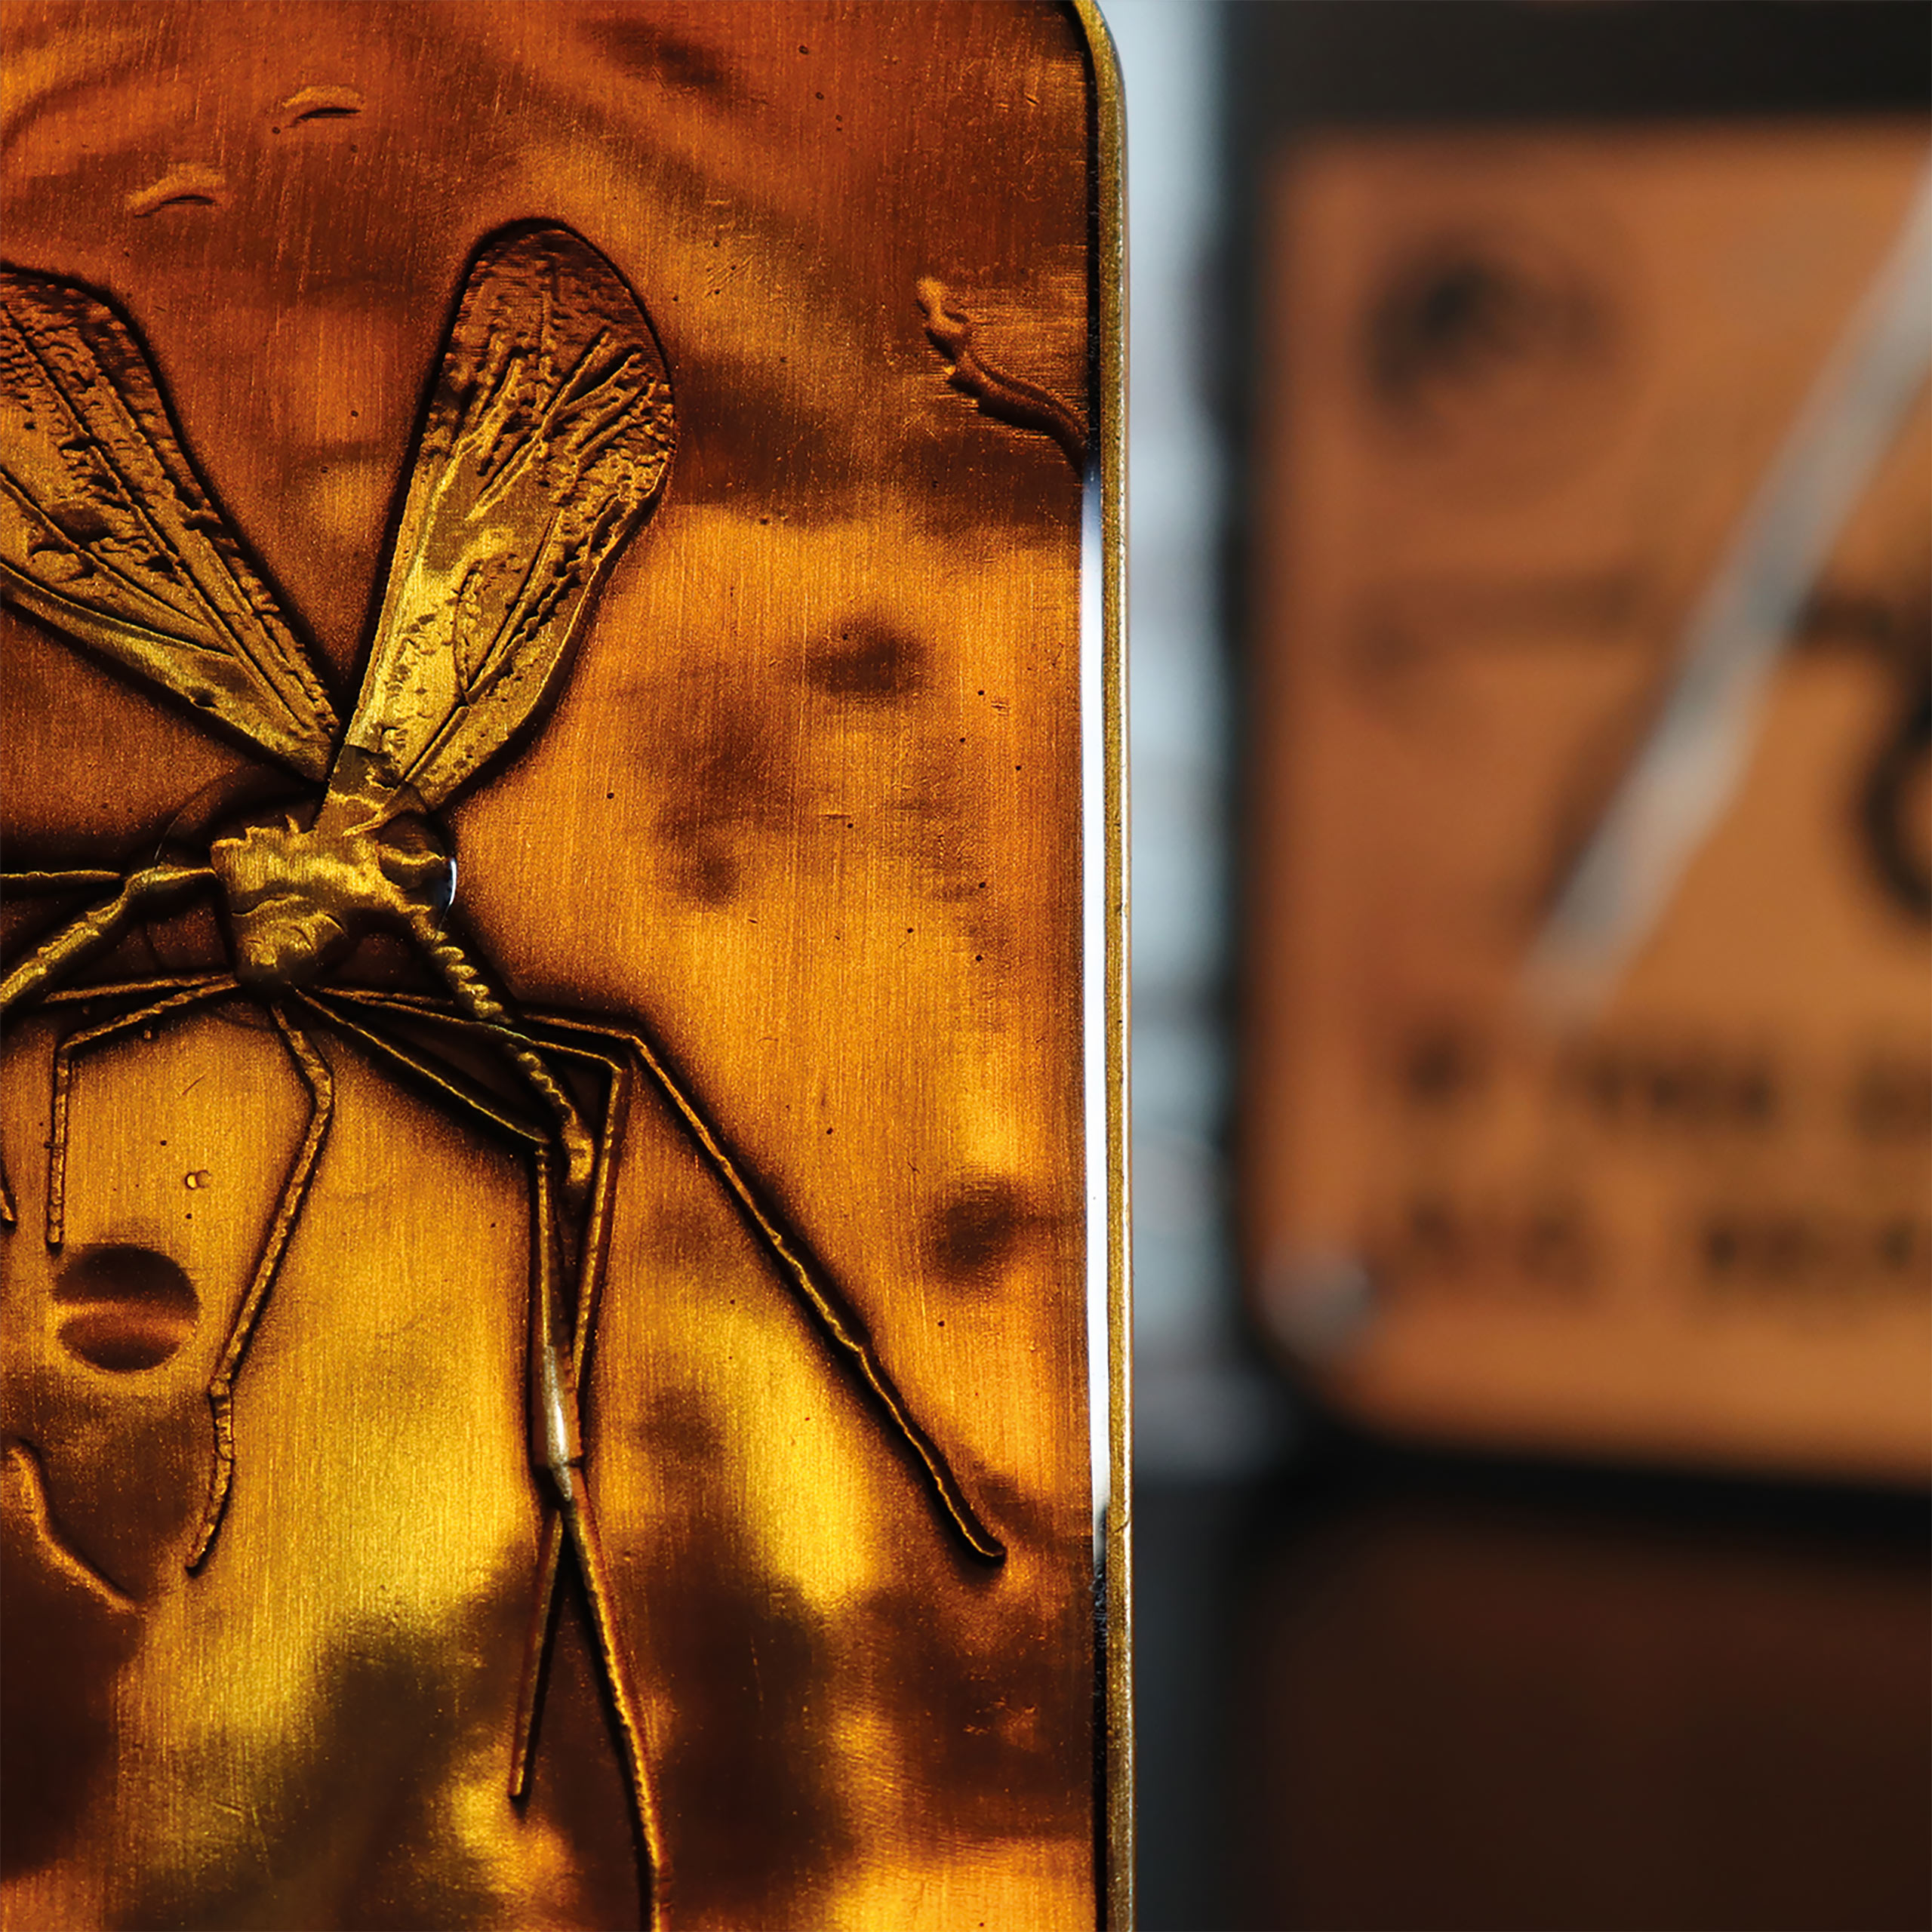 Jurassic Park - Mosquito in Amber Metal Bar Replica Limited